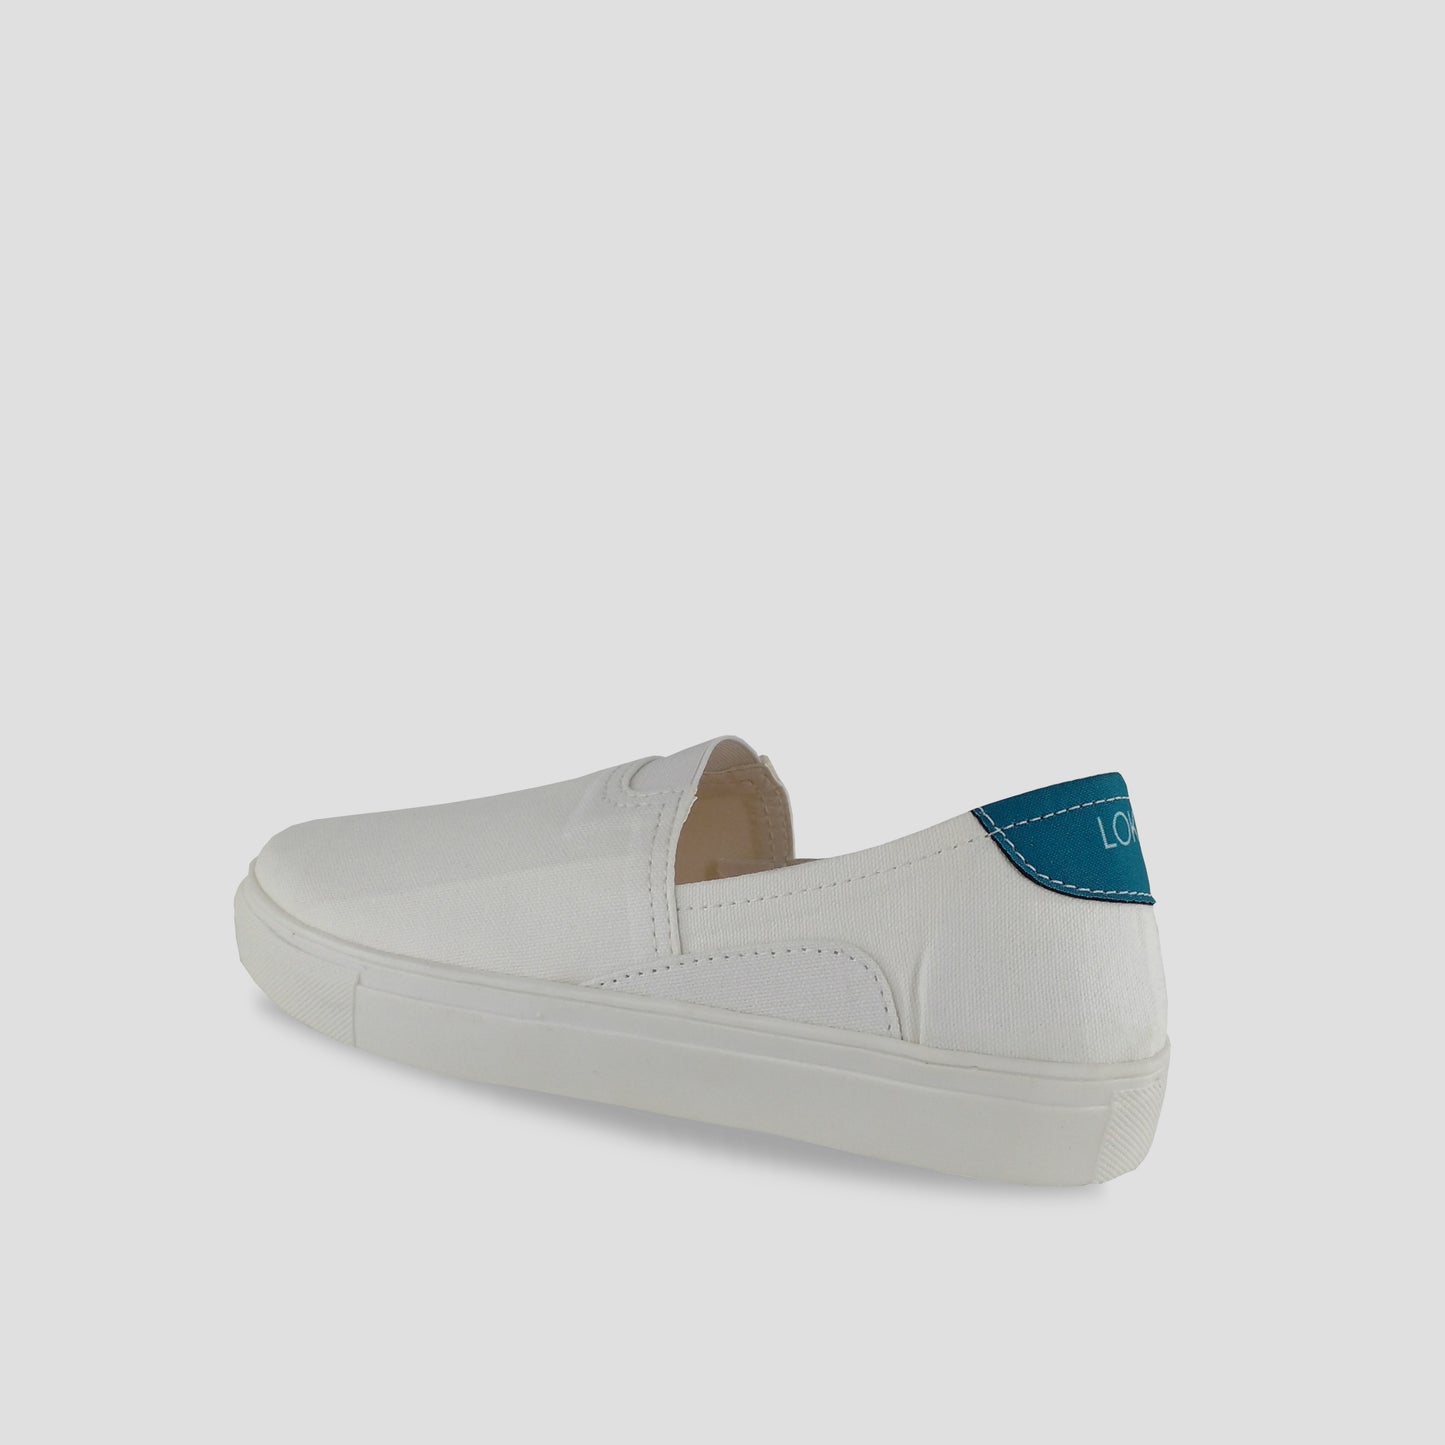 The White Canvas - Teal Tab